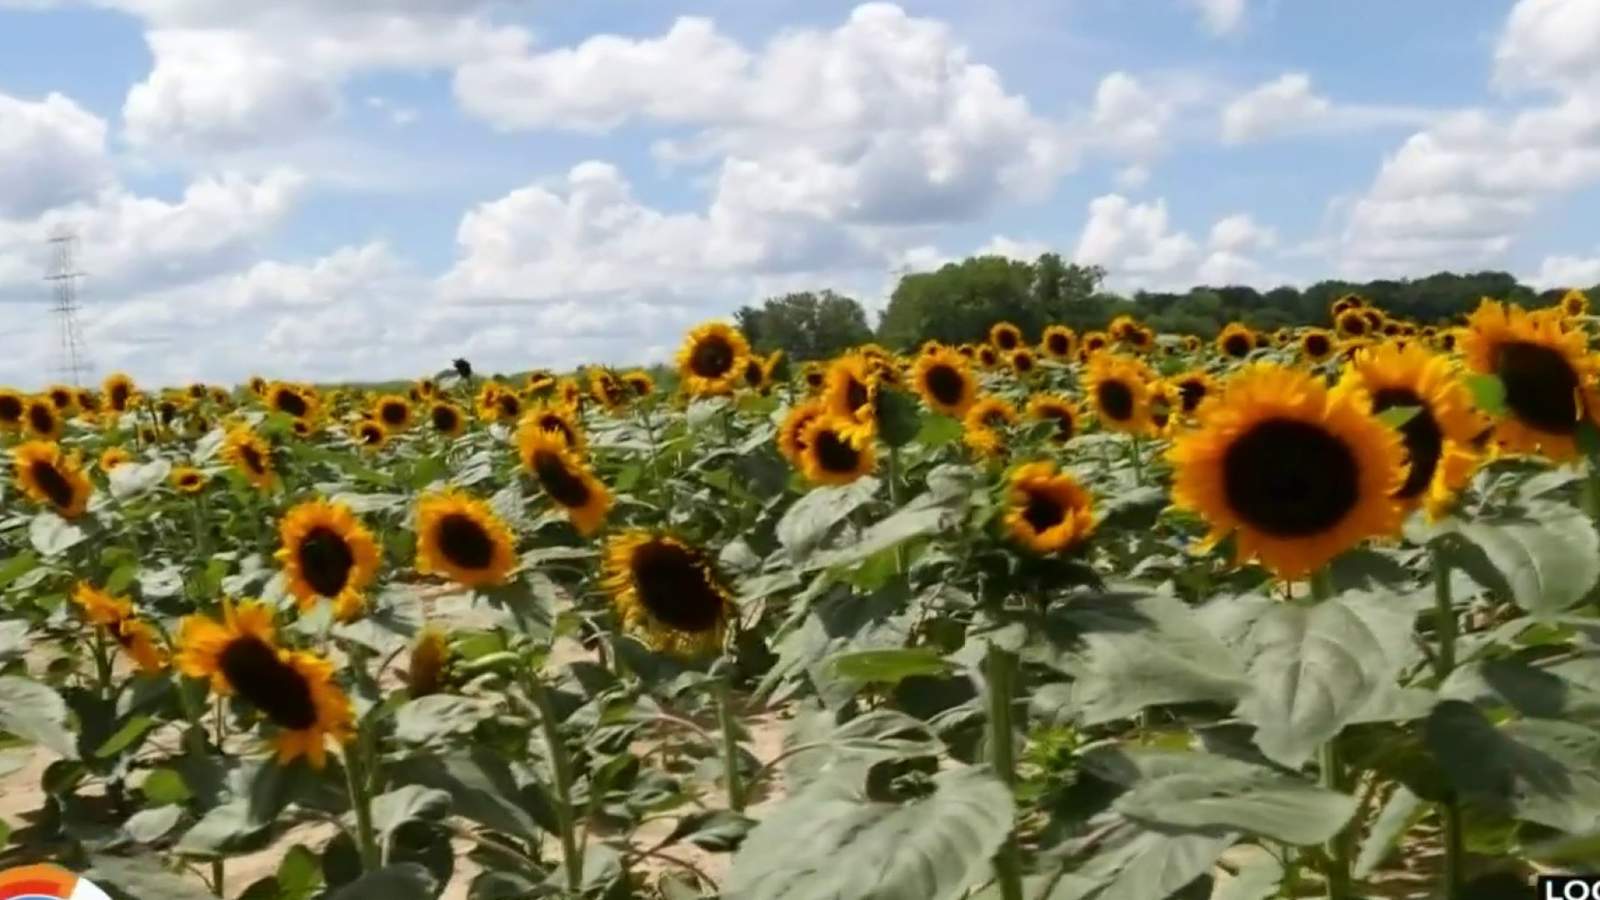 Get some flower power at this sunflower festival in the D